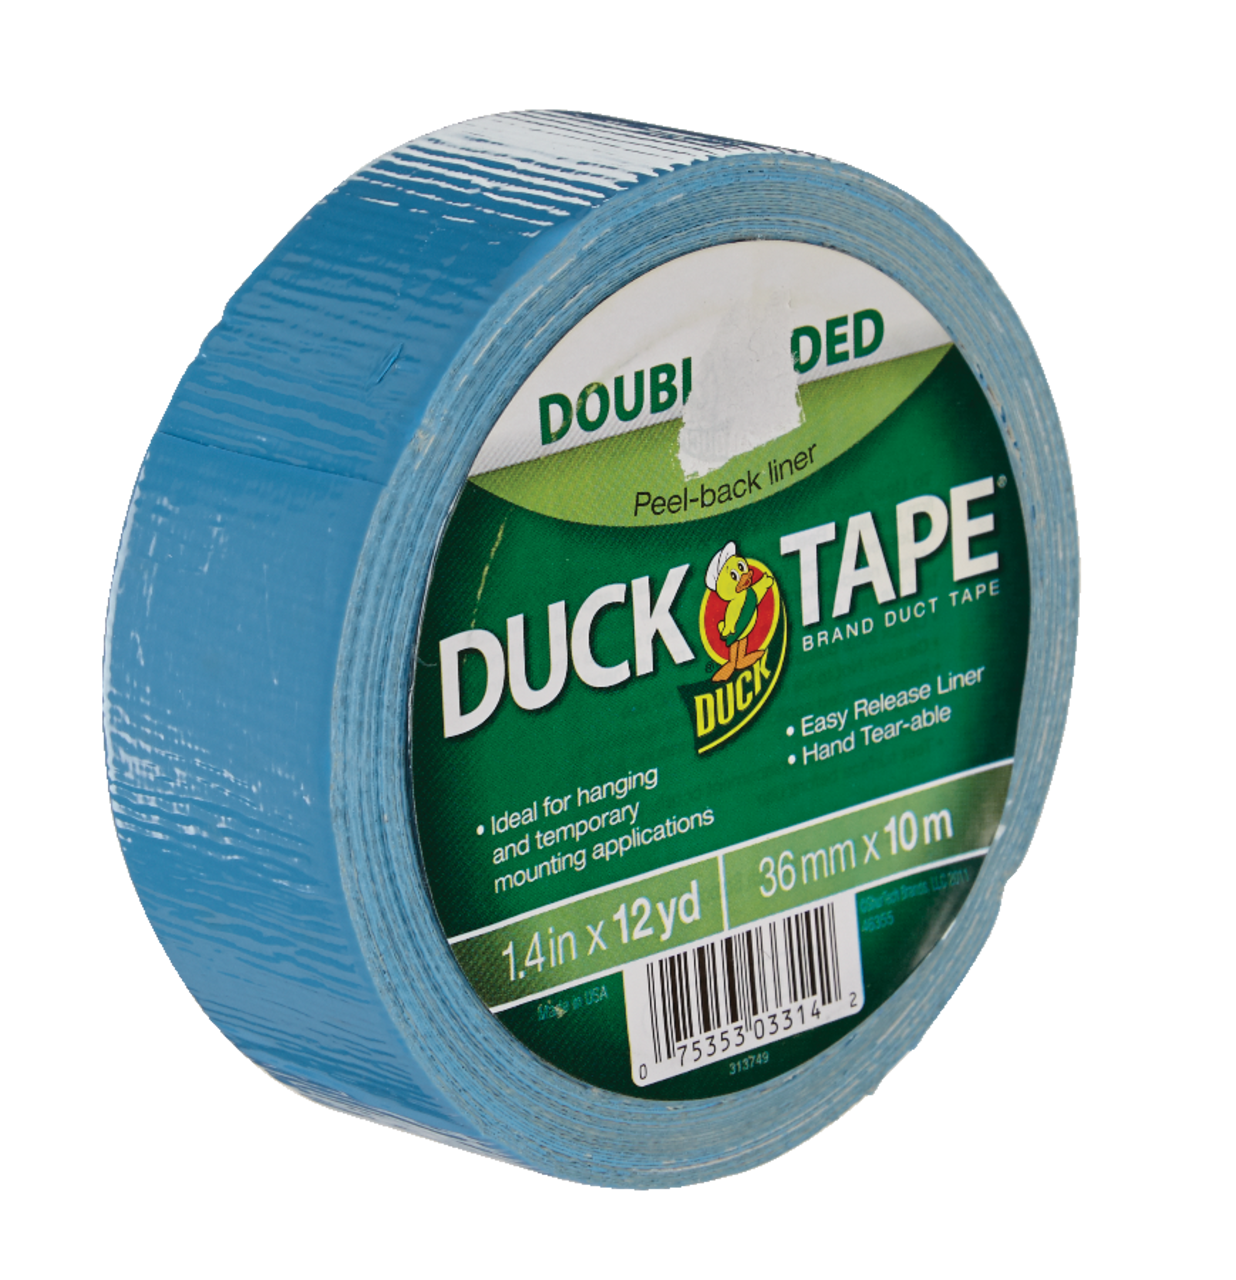 Double Sided Duck Brand Duct Tape - Blue, 1.41 in. x 12 yd.